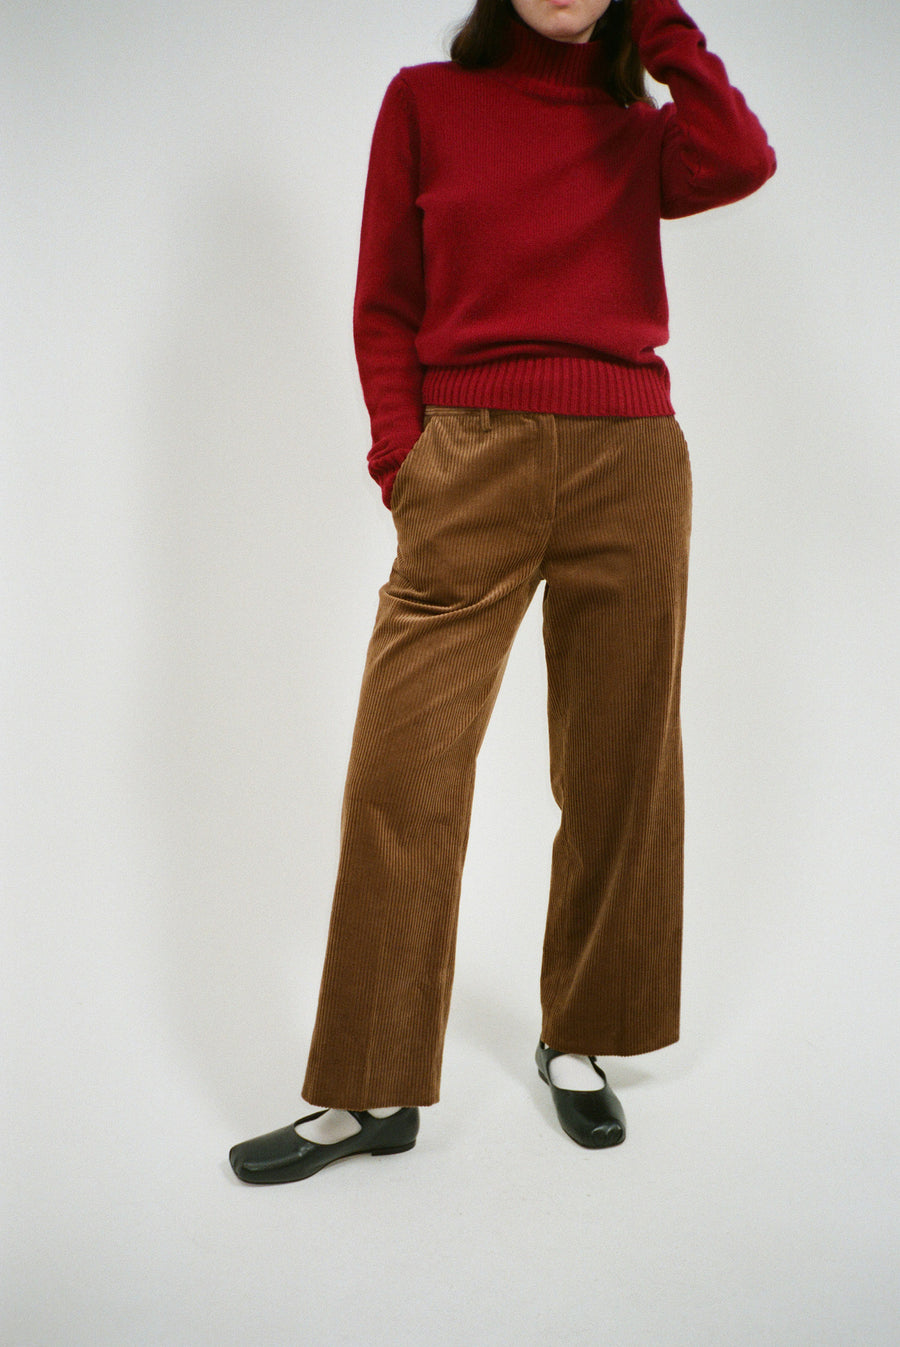 BOXY PANT IN BRUNETTE